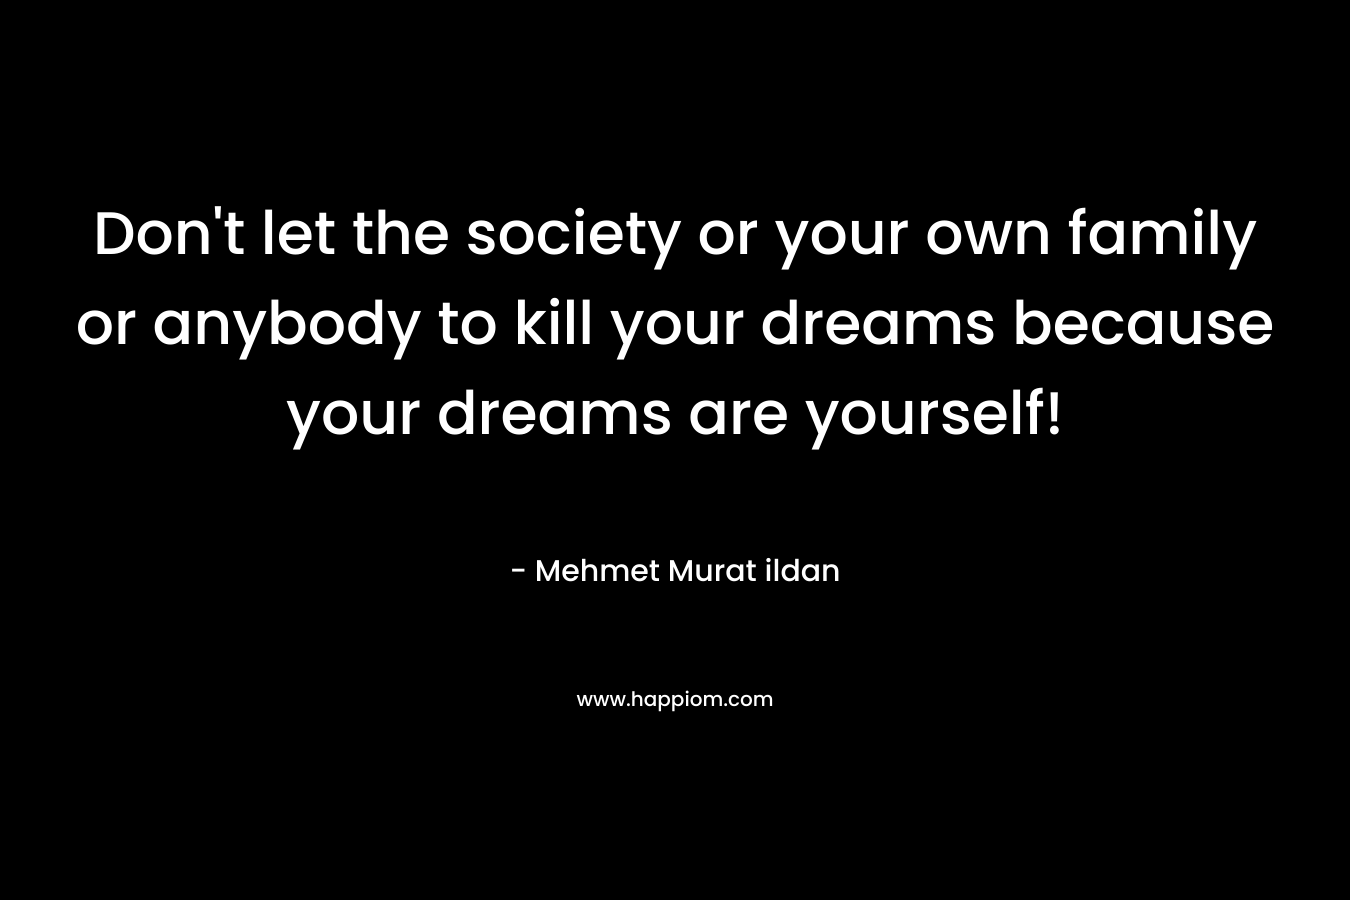 Don't let the society or your own family or anybody to kill your dreams because your dreams are yourself!